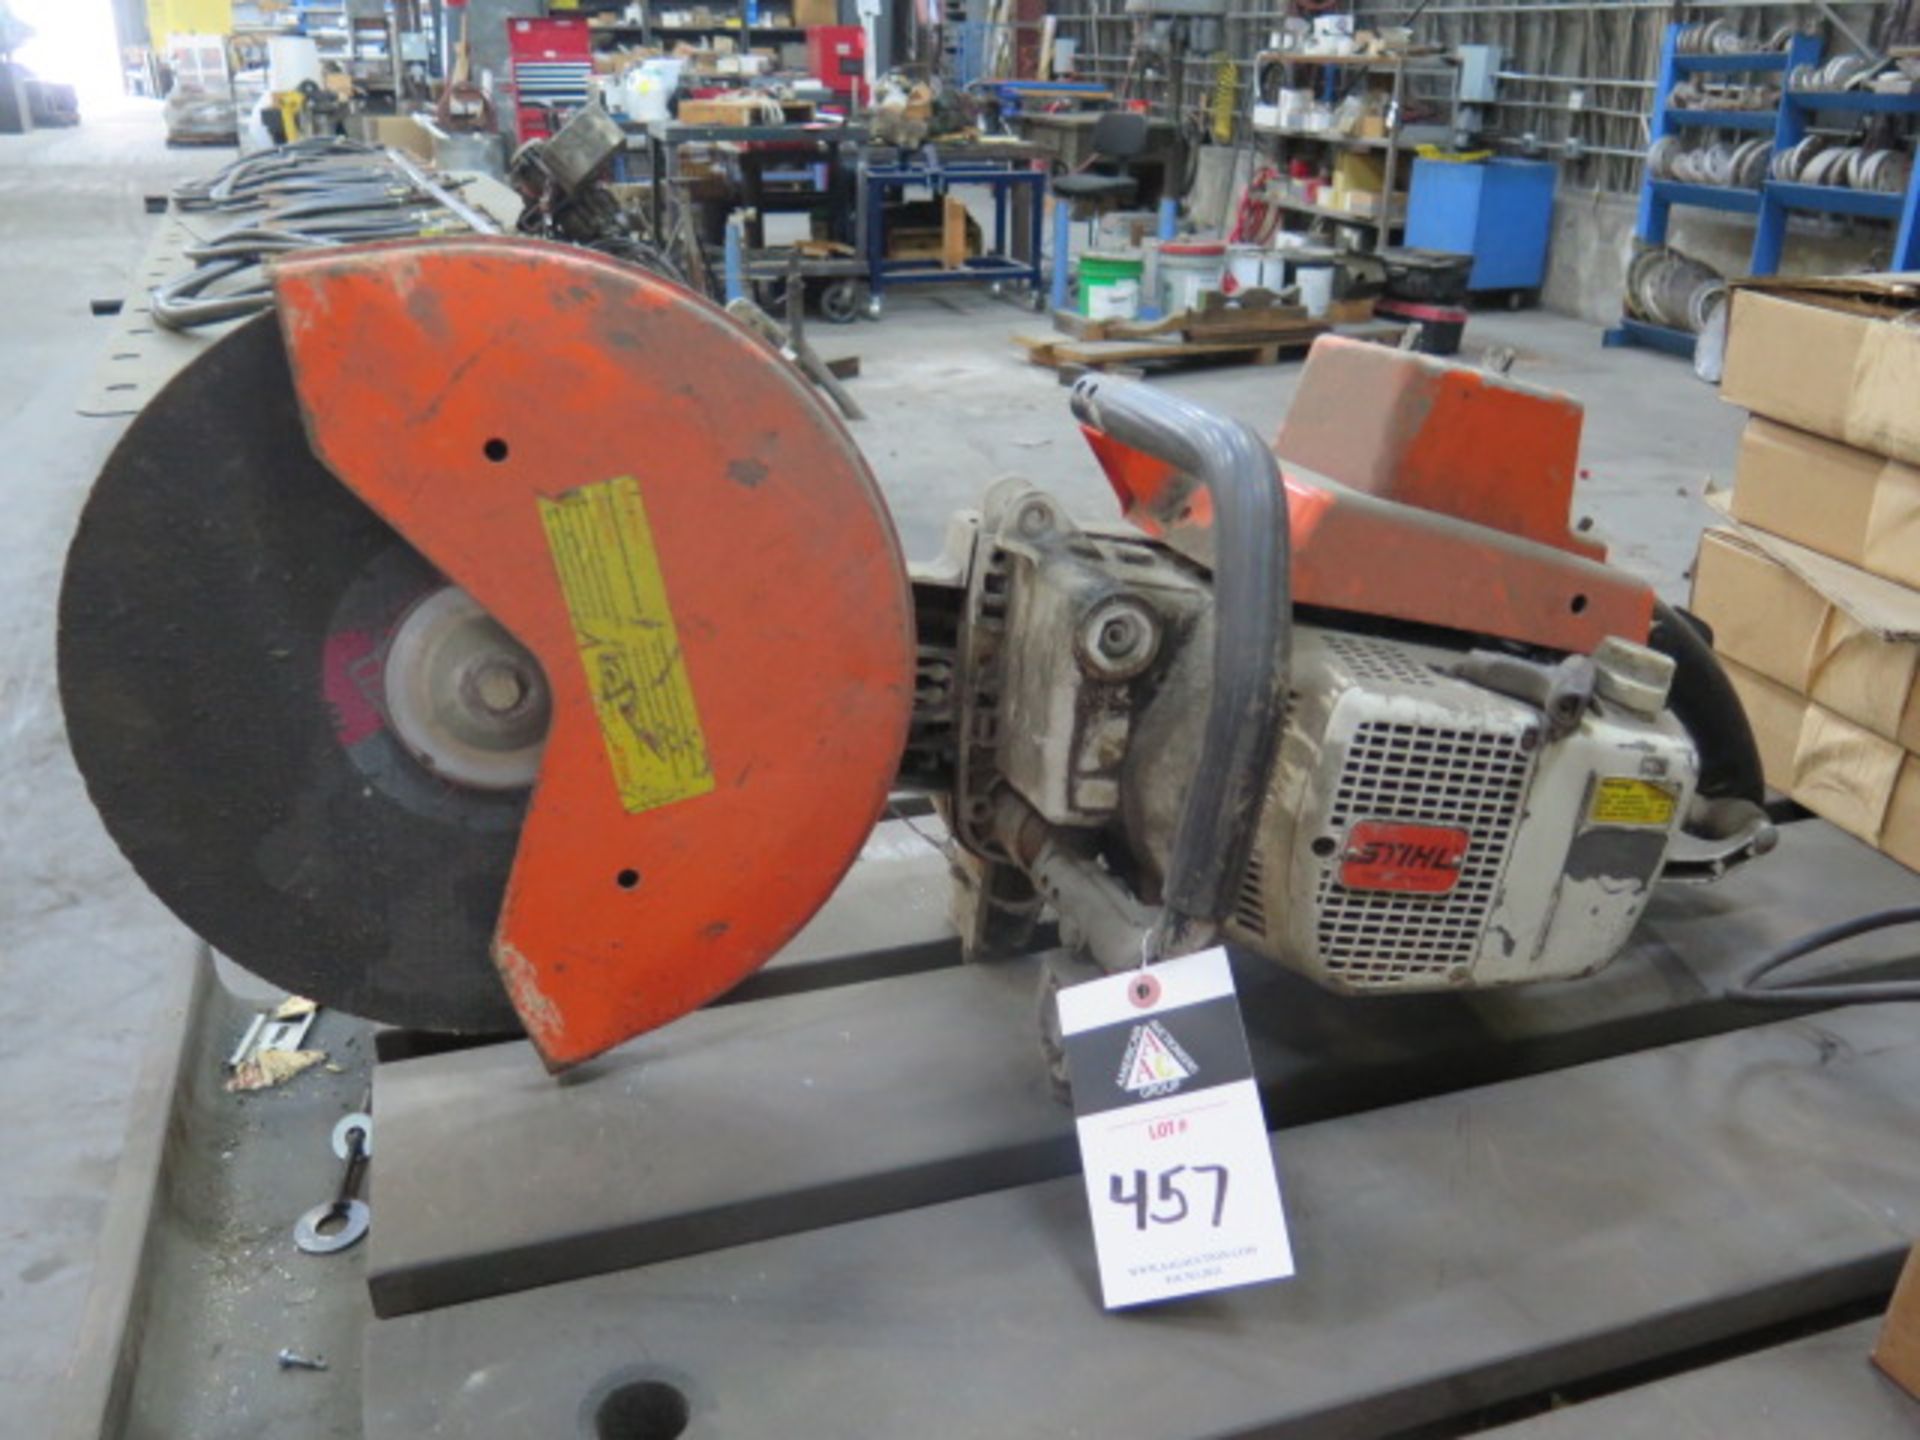 Stihl Gas Powered Abrasive Saw (SOLD AS-IS - NO WARRANTY)